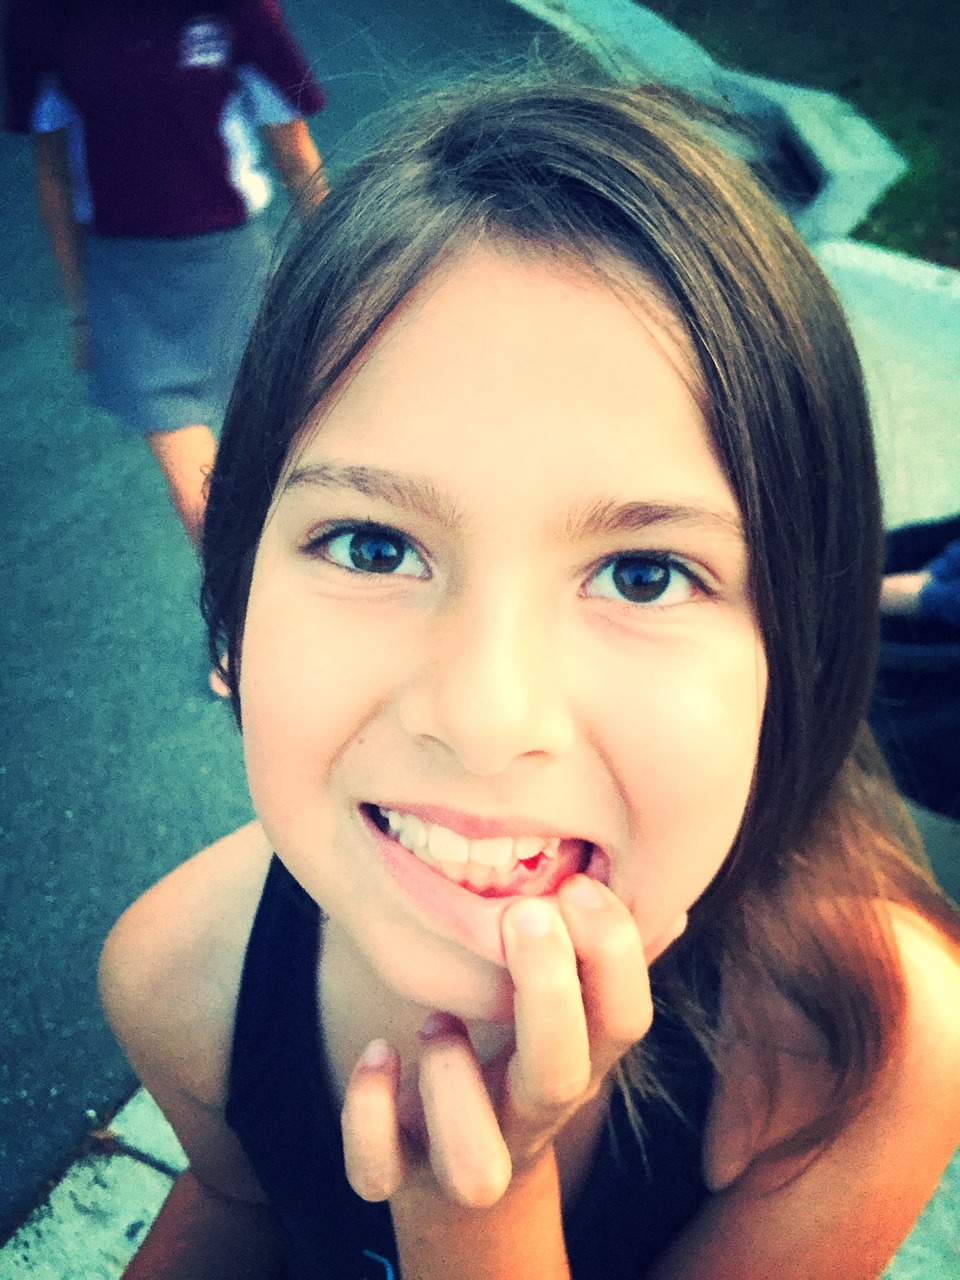 lost tooth tooth child free photo